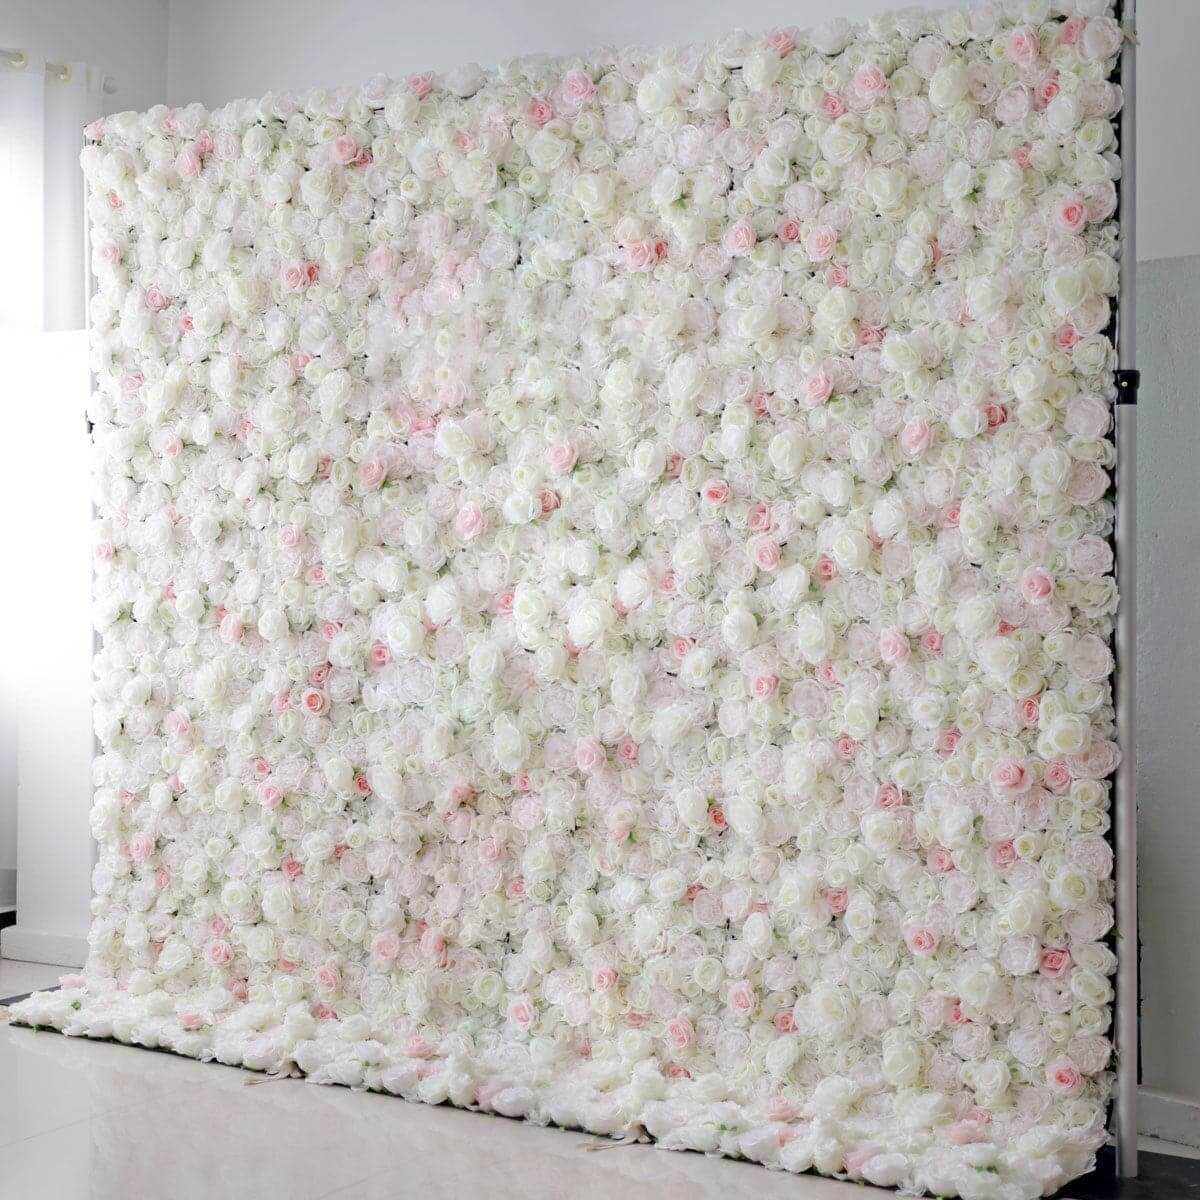 Luxury Artificial 3D Rolled Up Hotel Home Decoration for Wedding Party Ceiling Decoration Blush Pink Flower Wall